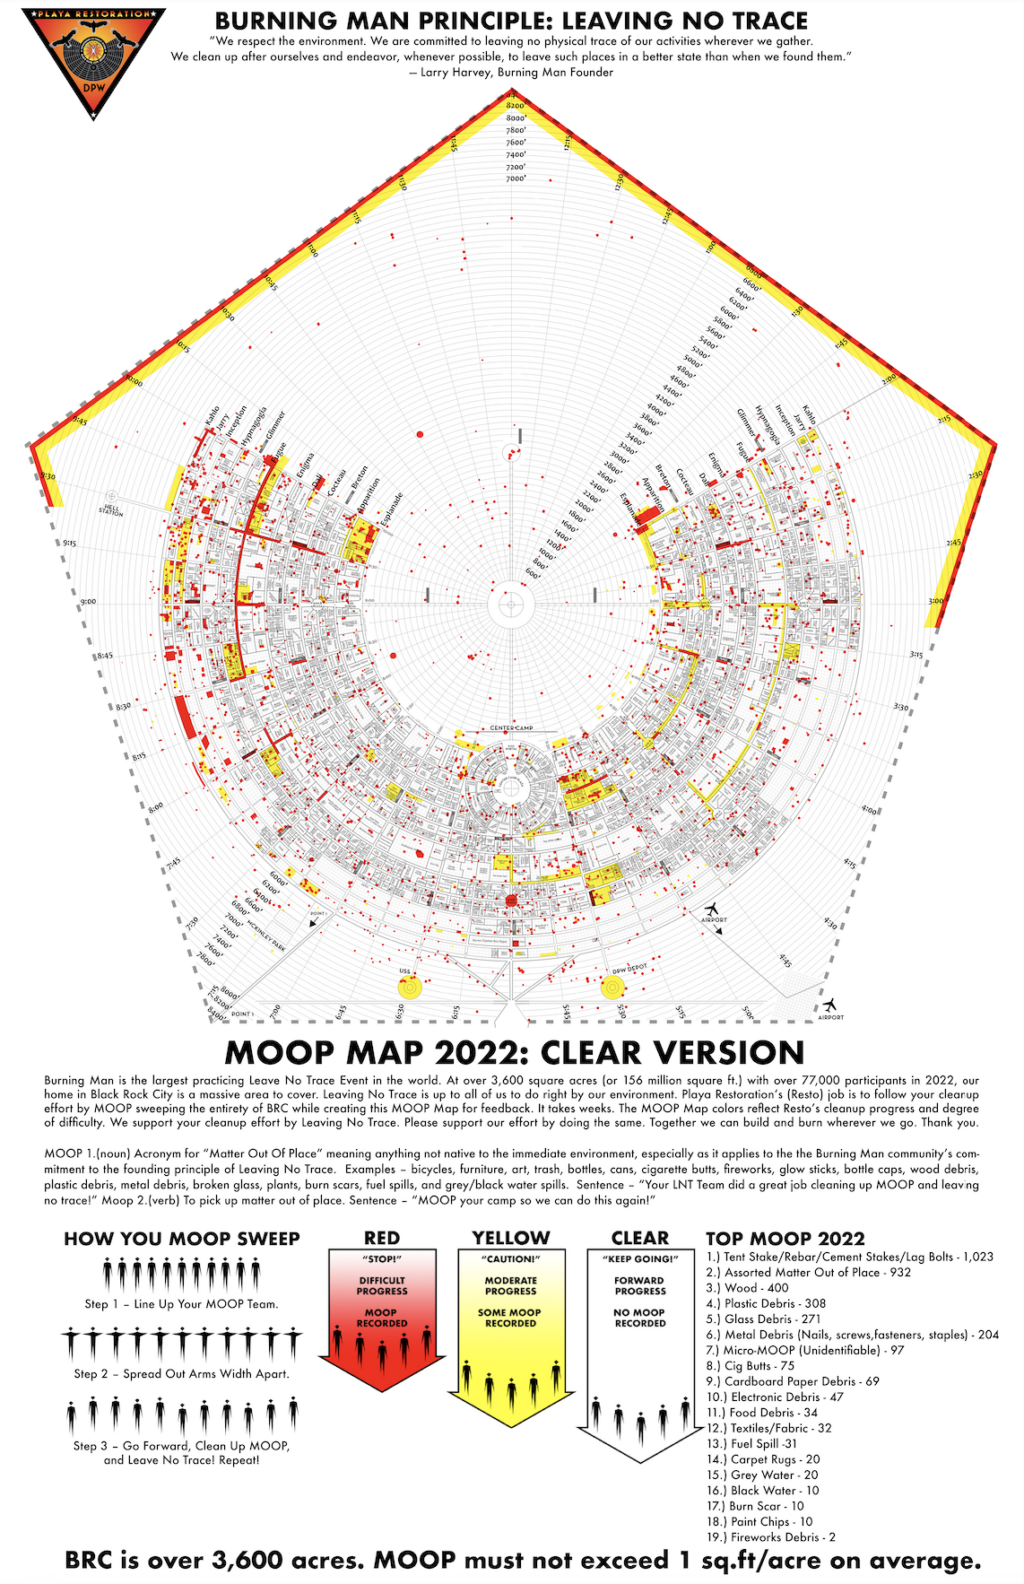 Leaving No Trace 2022 MOOP Maps, Inspection, and the New 1 MOOP